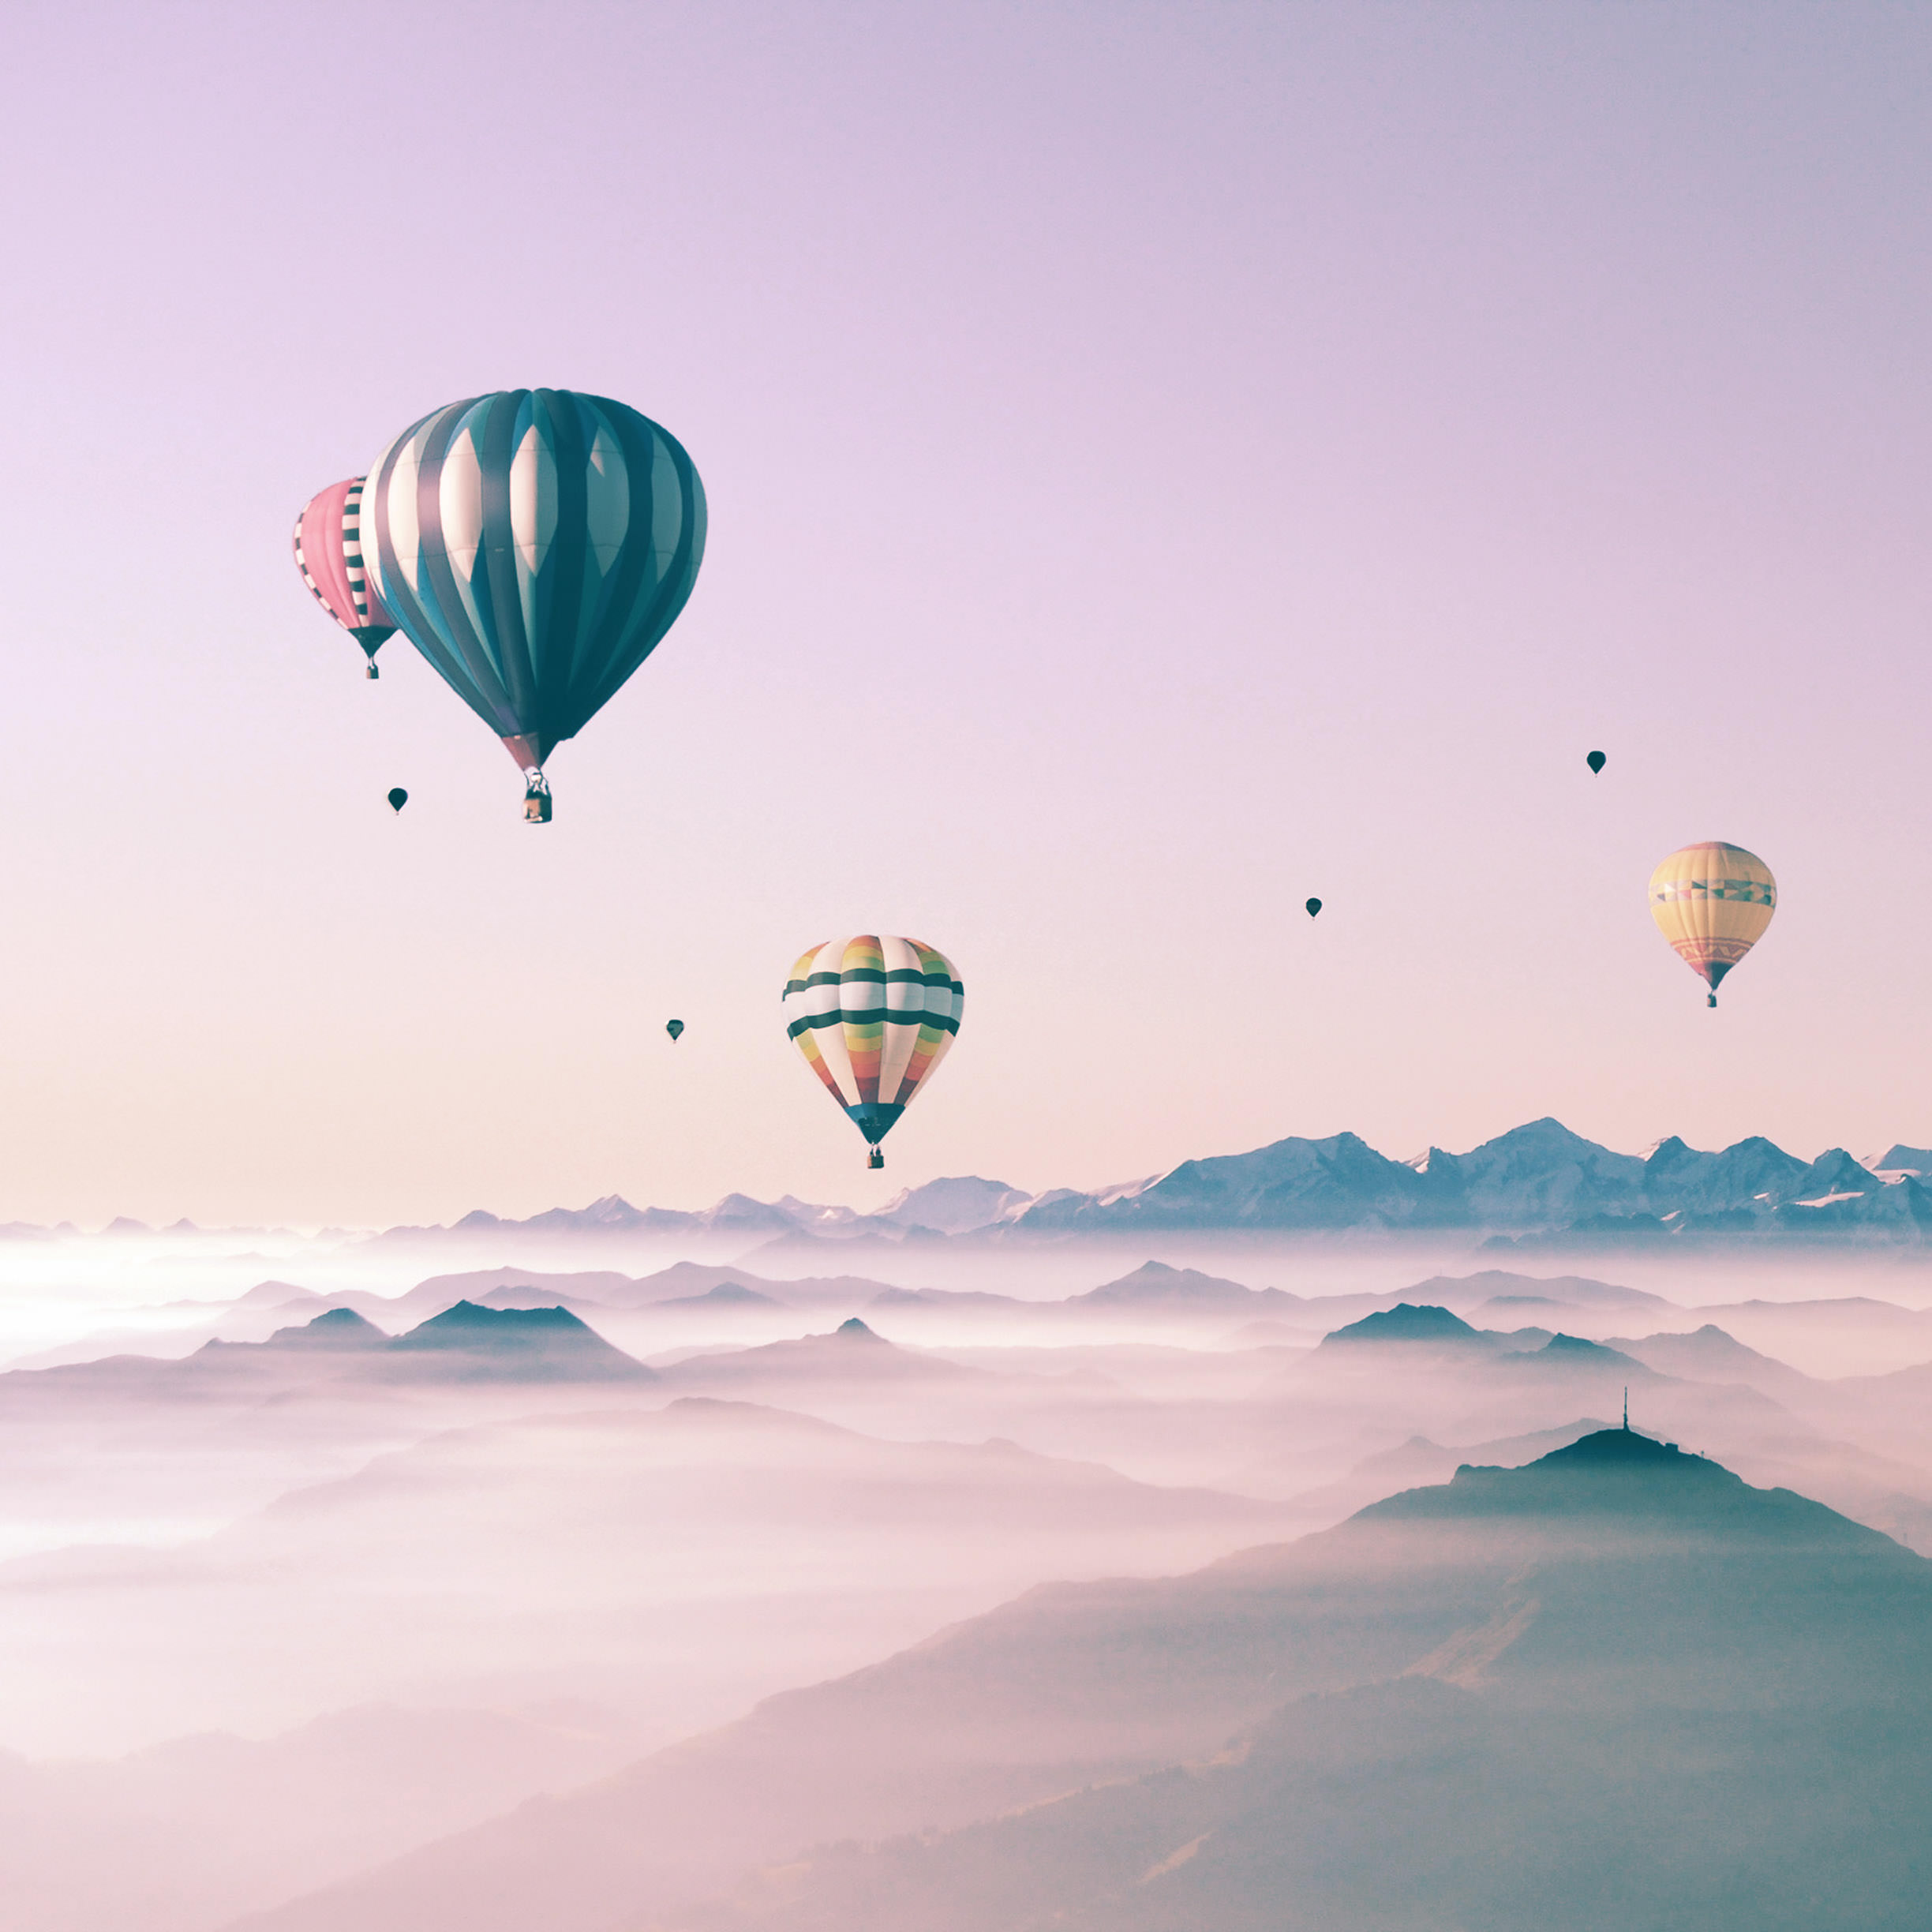 cool wallpapers for ipad mini,hot air ballooning,hot air balloon,sky,atmosphere,cloud